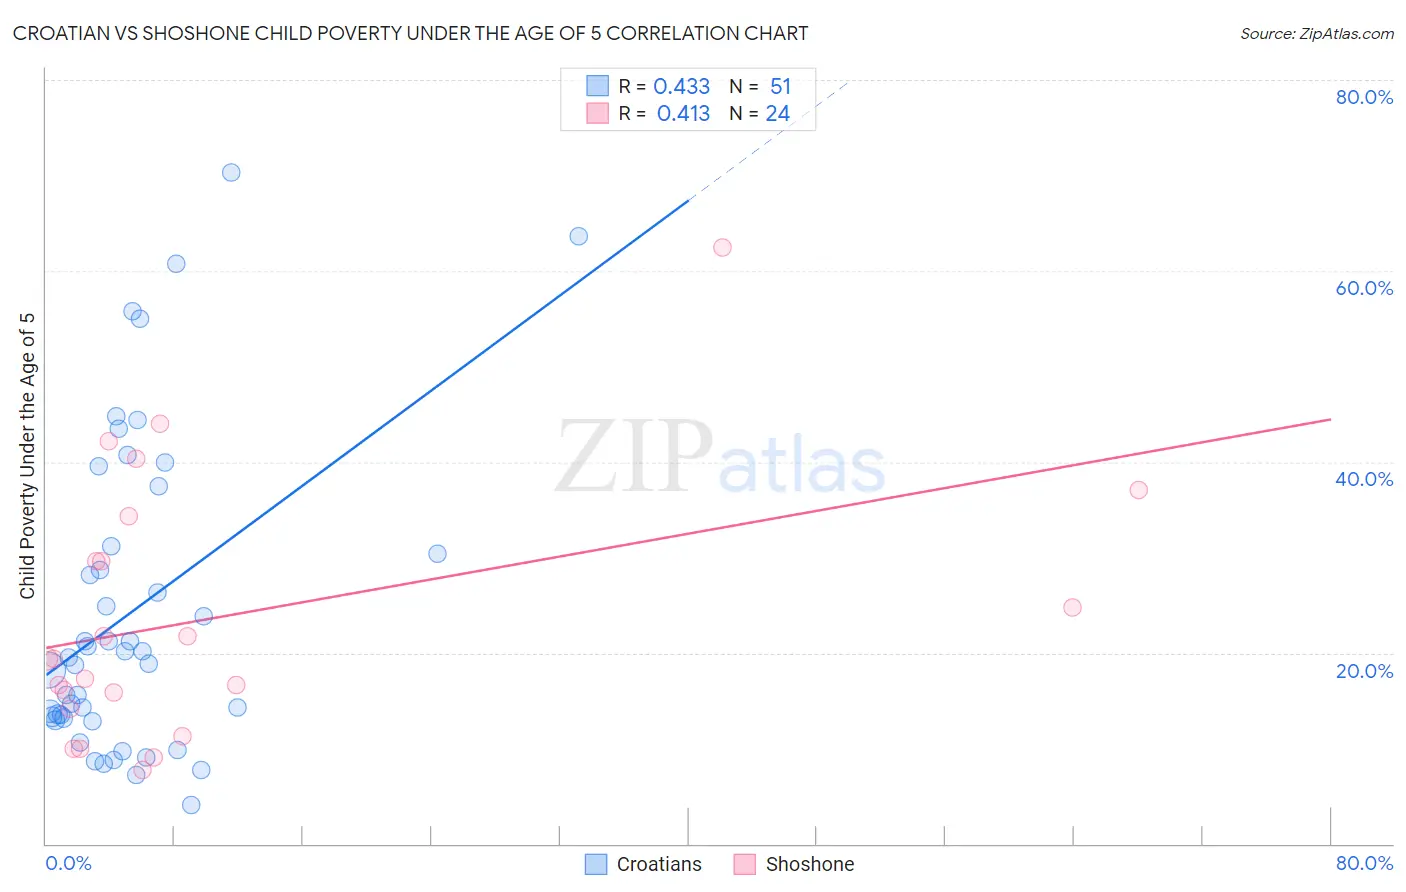 Croatian vs Shoshone Child Poverty Under the Age of 5